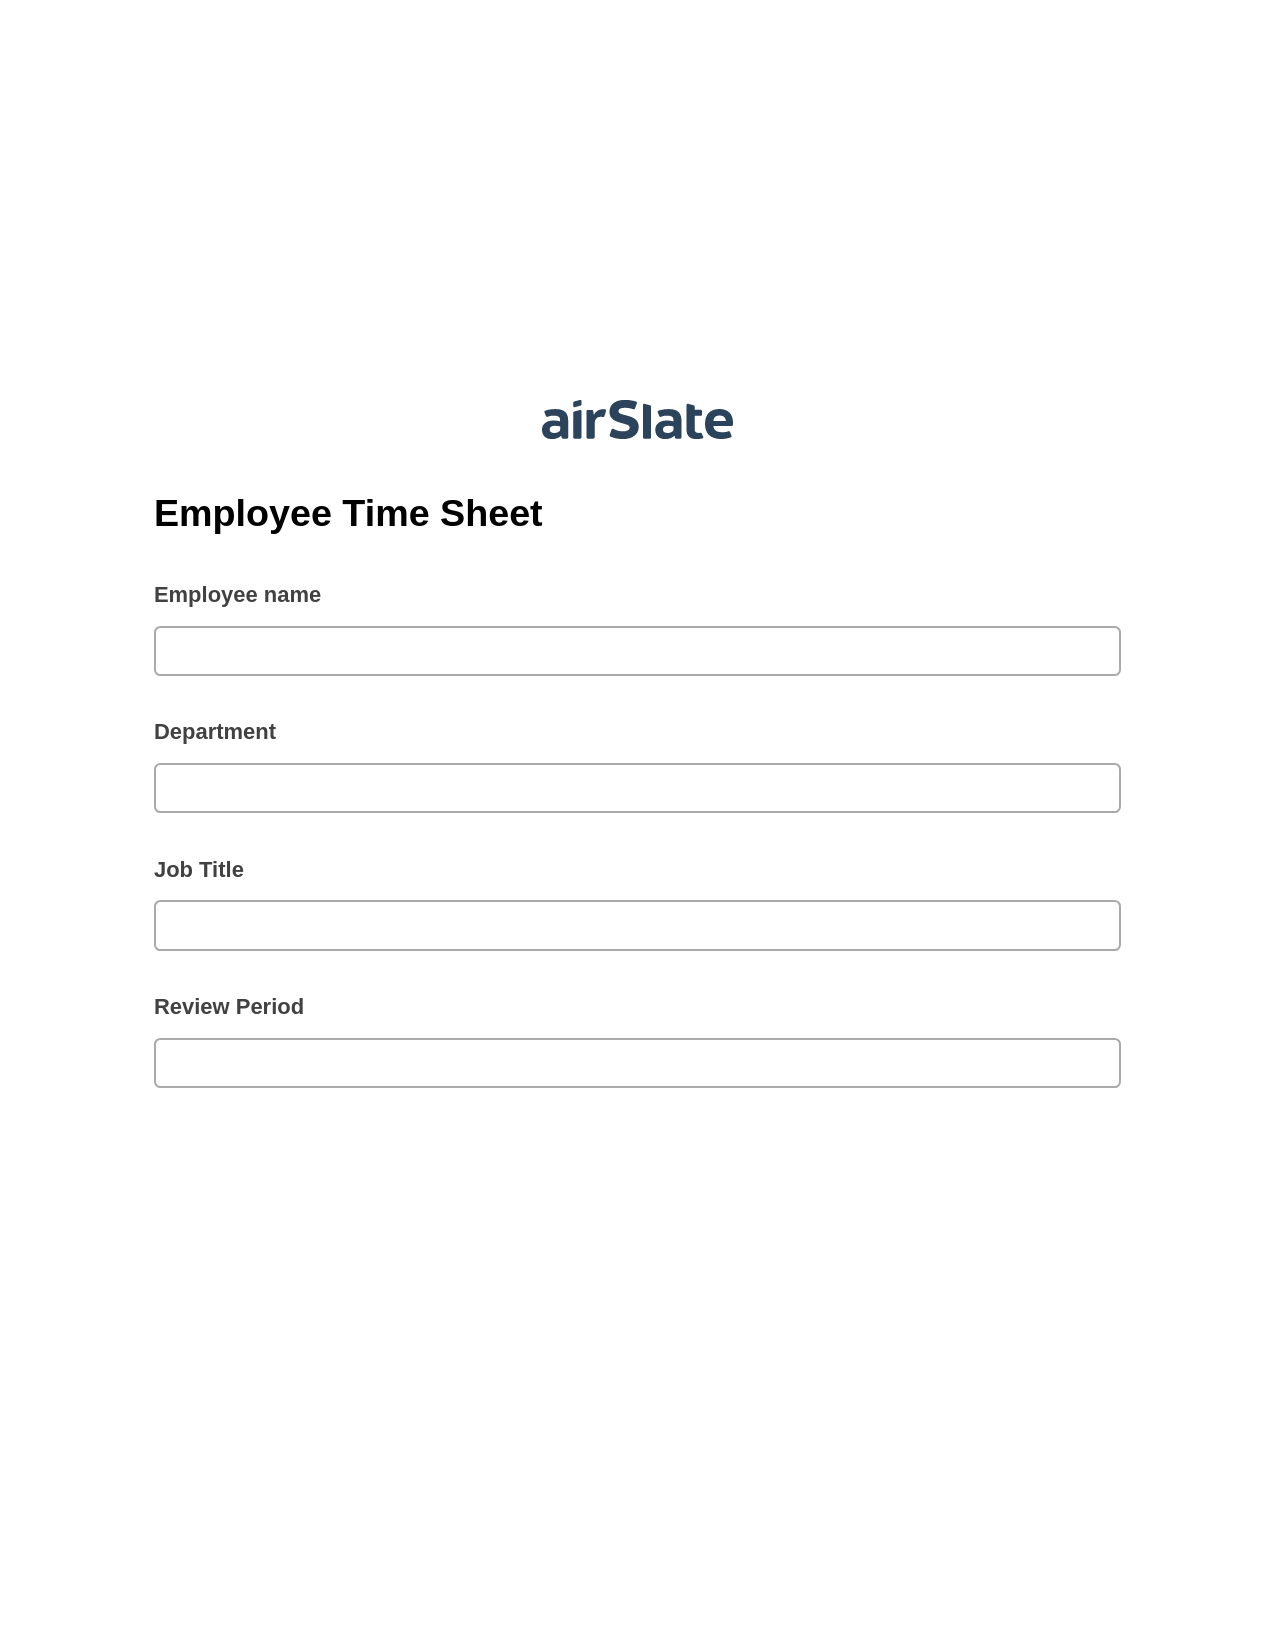 Employee Time Sheet Pre-fill from Excel Spreadsheet Bot, Create Salesforce Records Bot, Email Notification Postfinish Bot